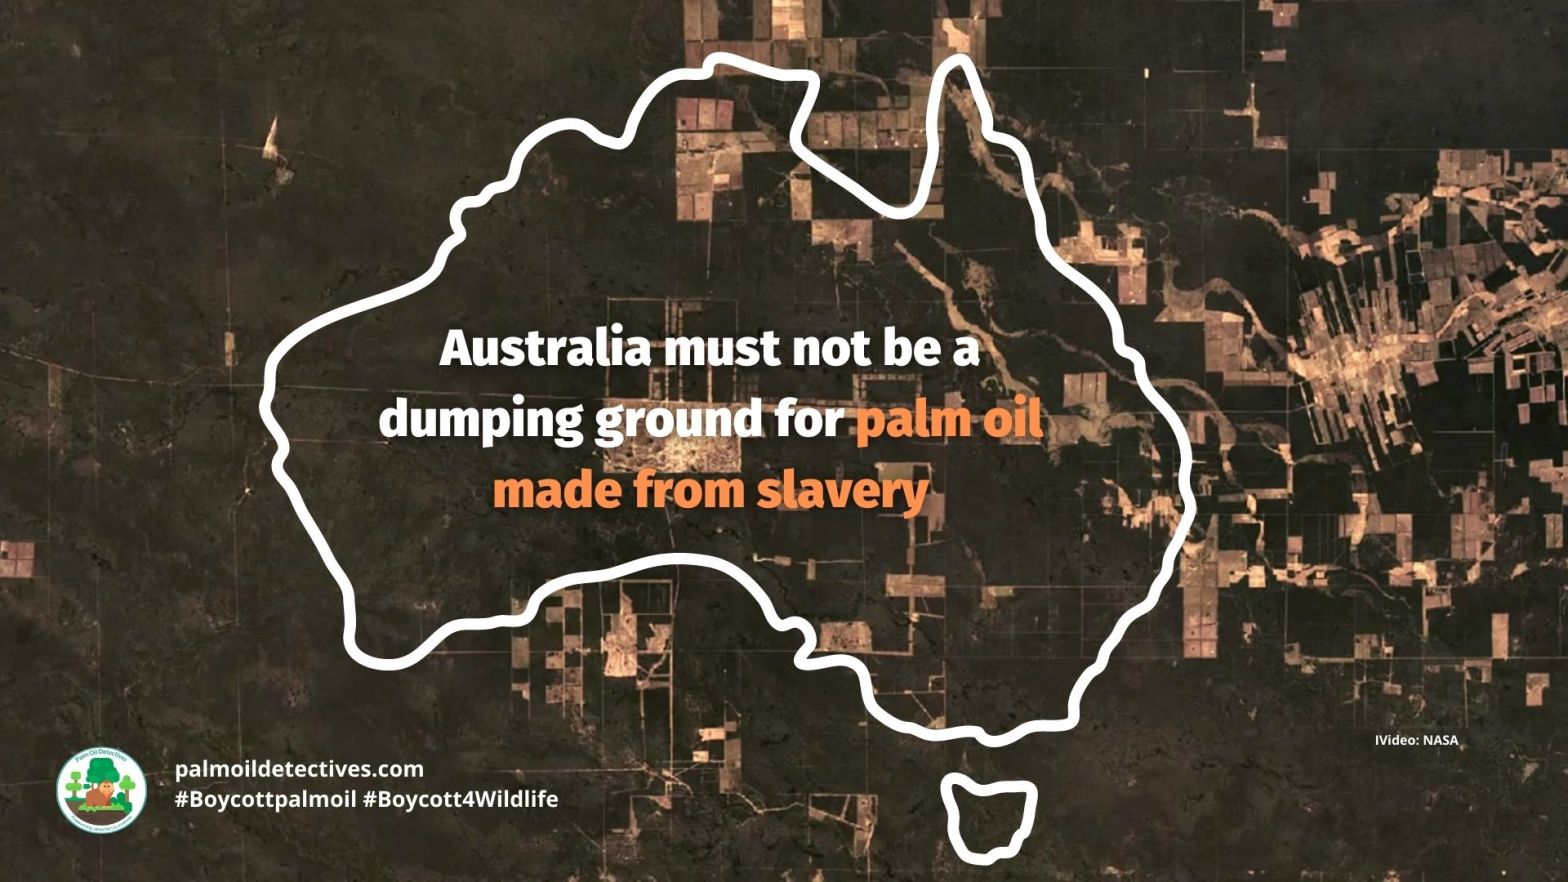 Australia must not be a dumping ground for palm oil made from slavery: The Australian Greens